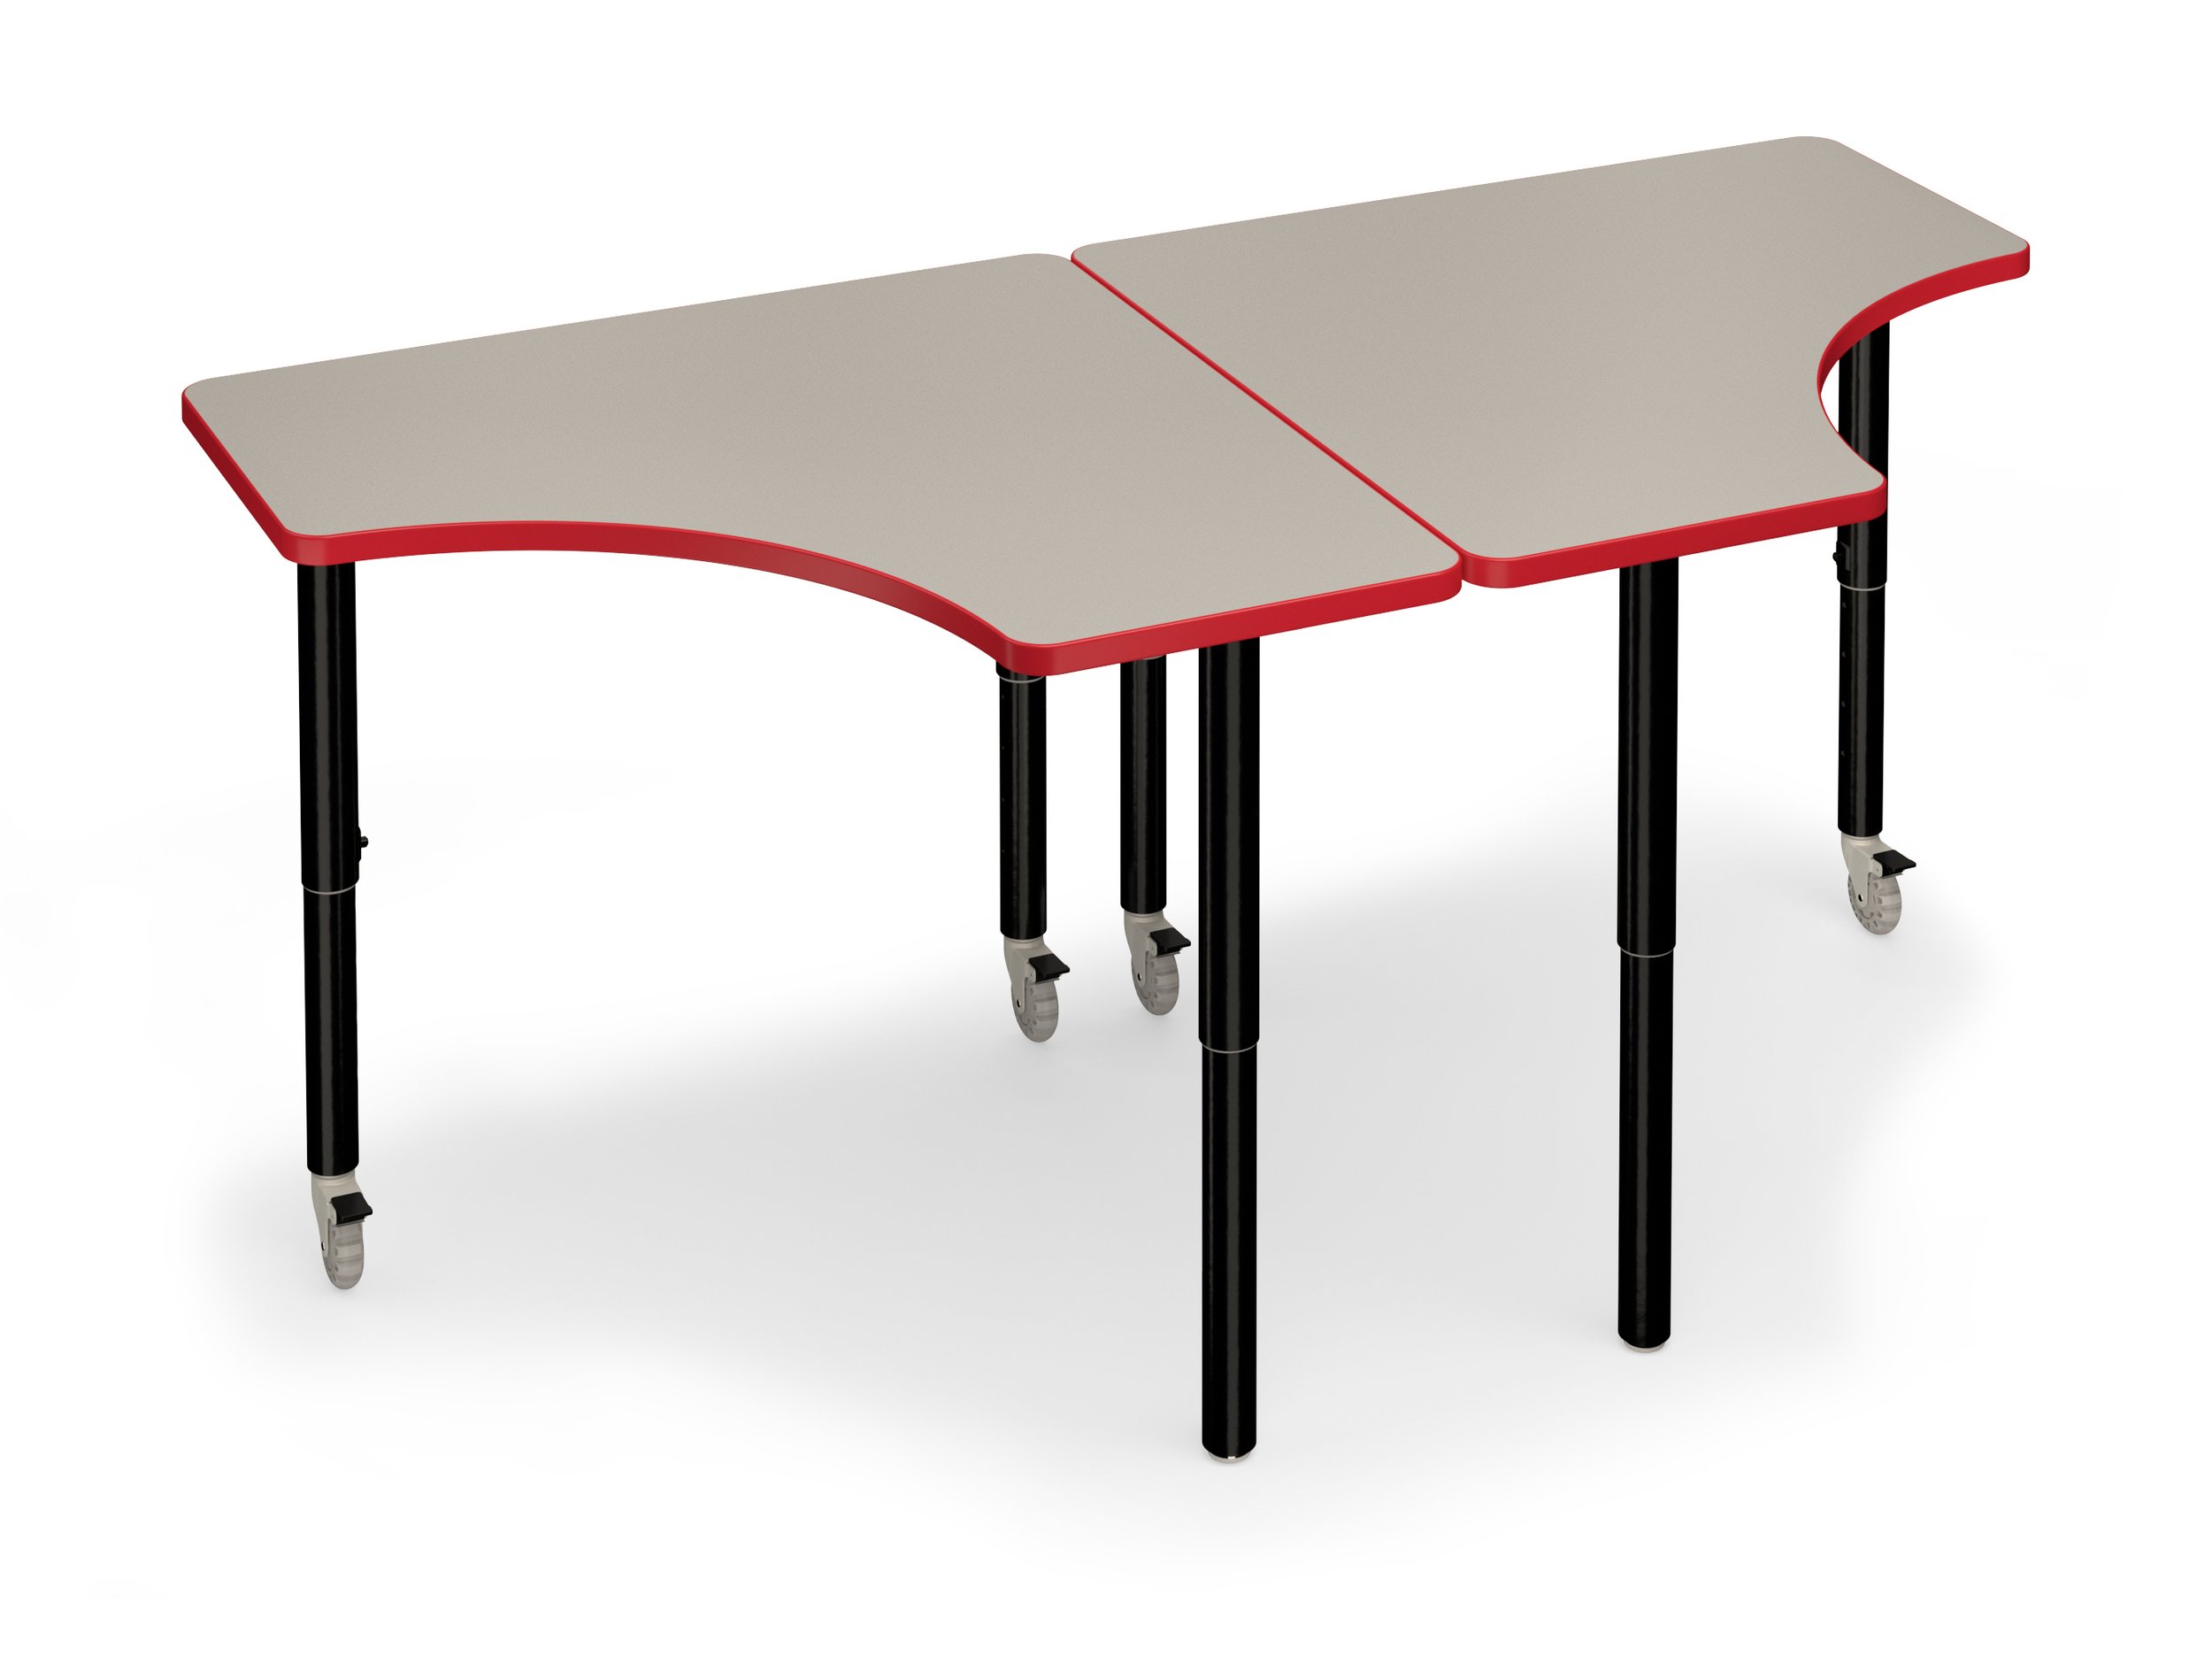 Axis Table